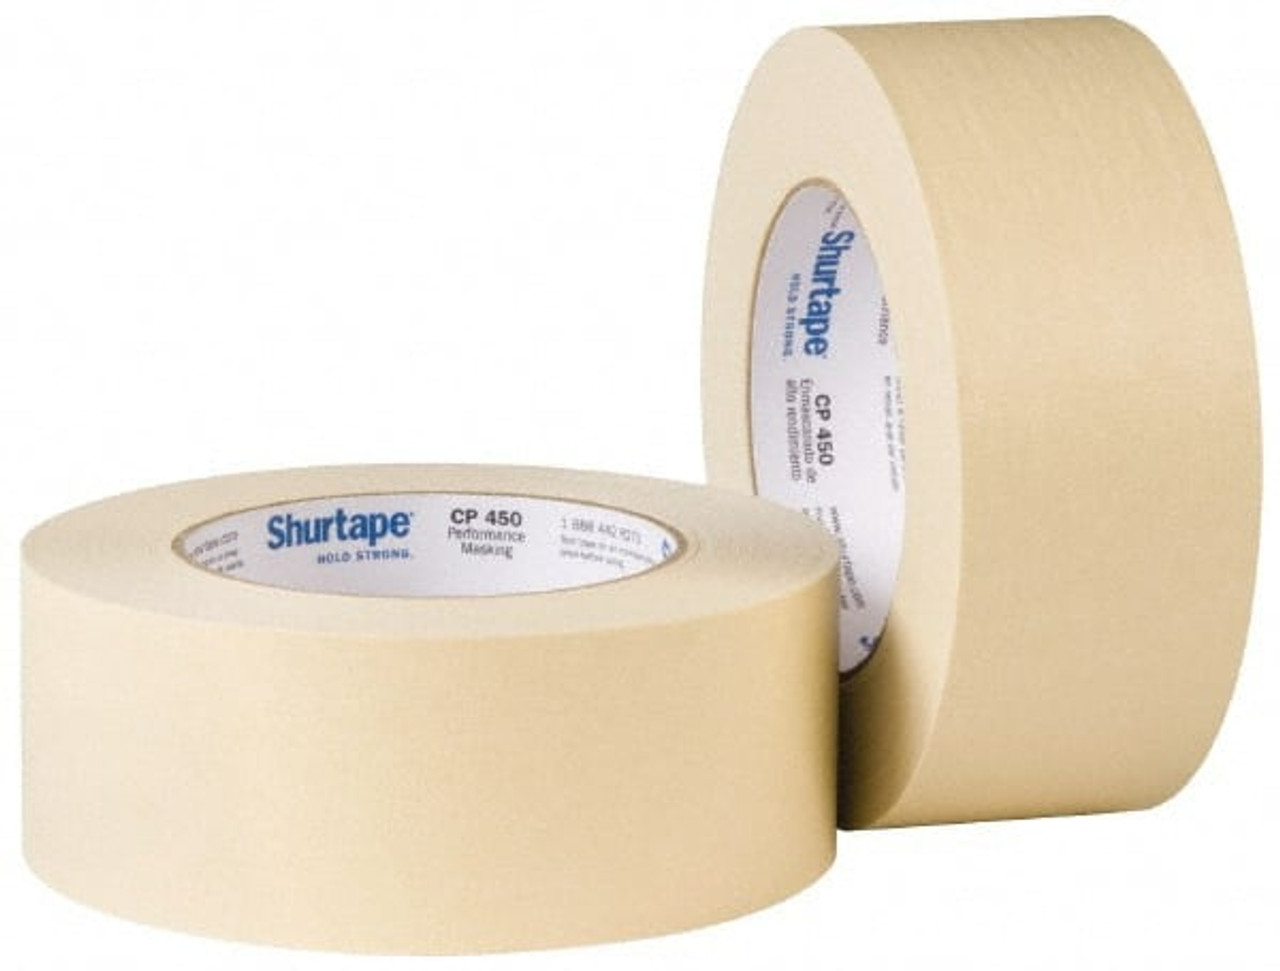 DealFort 2Rolls Masking Tape,Wide Objective 2 inches x 55Yards(165ft)  Adhesive White Painters Tape,Versatile Artist Craft Paper Tape for  Painting